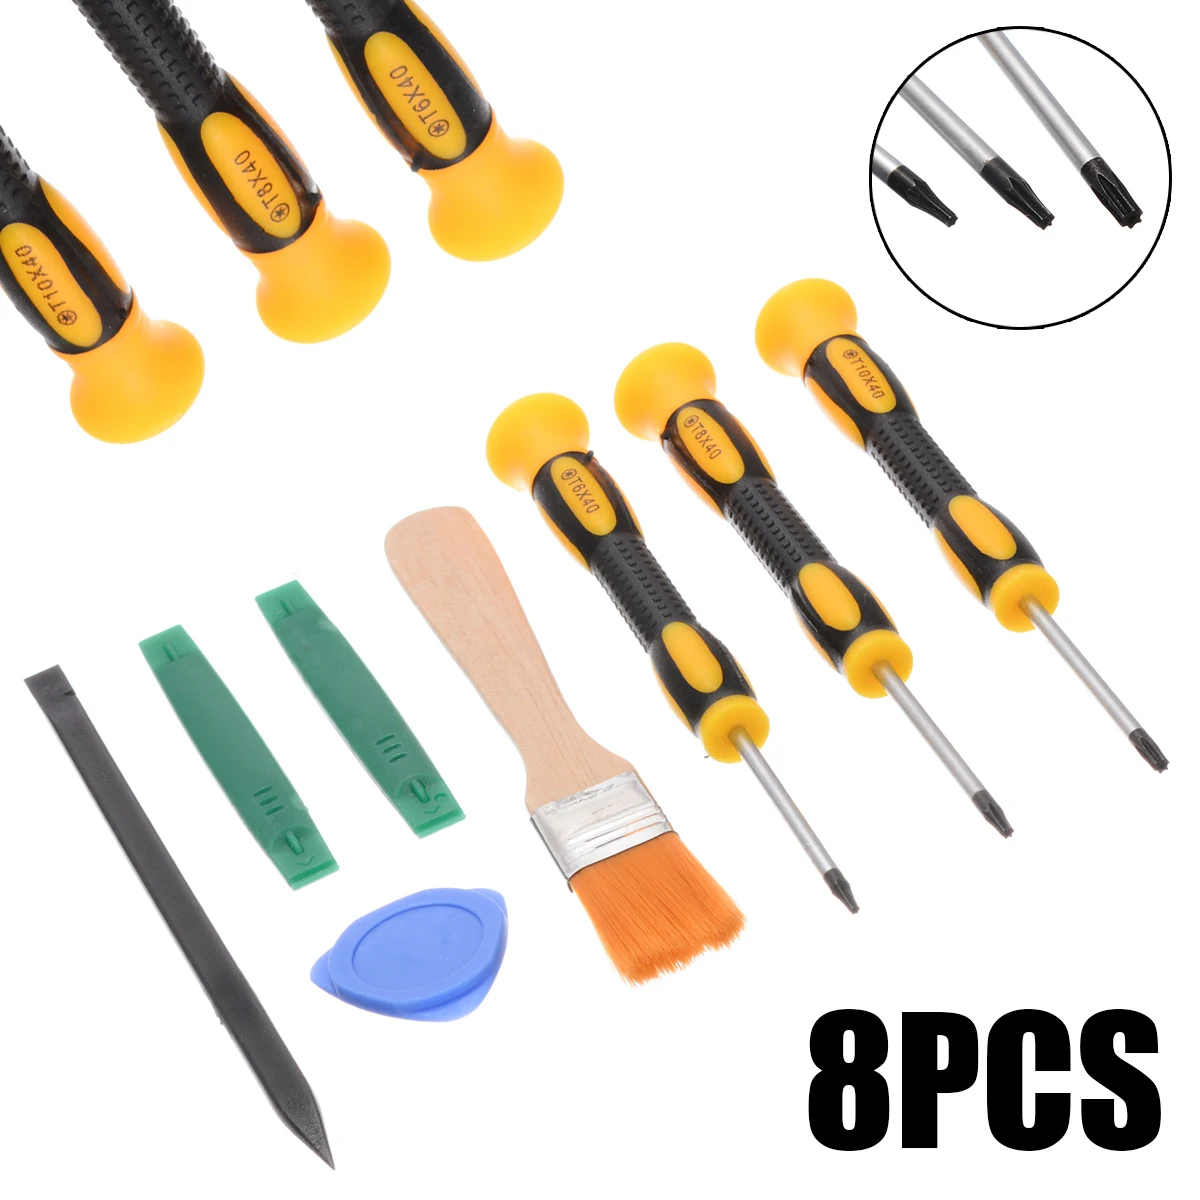 

8Pcs Torx T8 T6 T10 Screwdriver Prying Tool Kit Set with Cleaning Brush Phone Repair Tools Kit For Xbox One 360 PS3 PS4